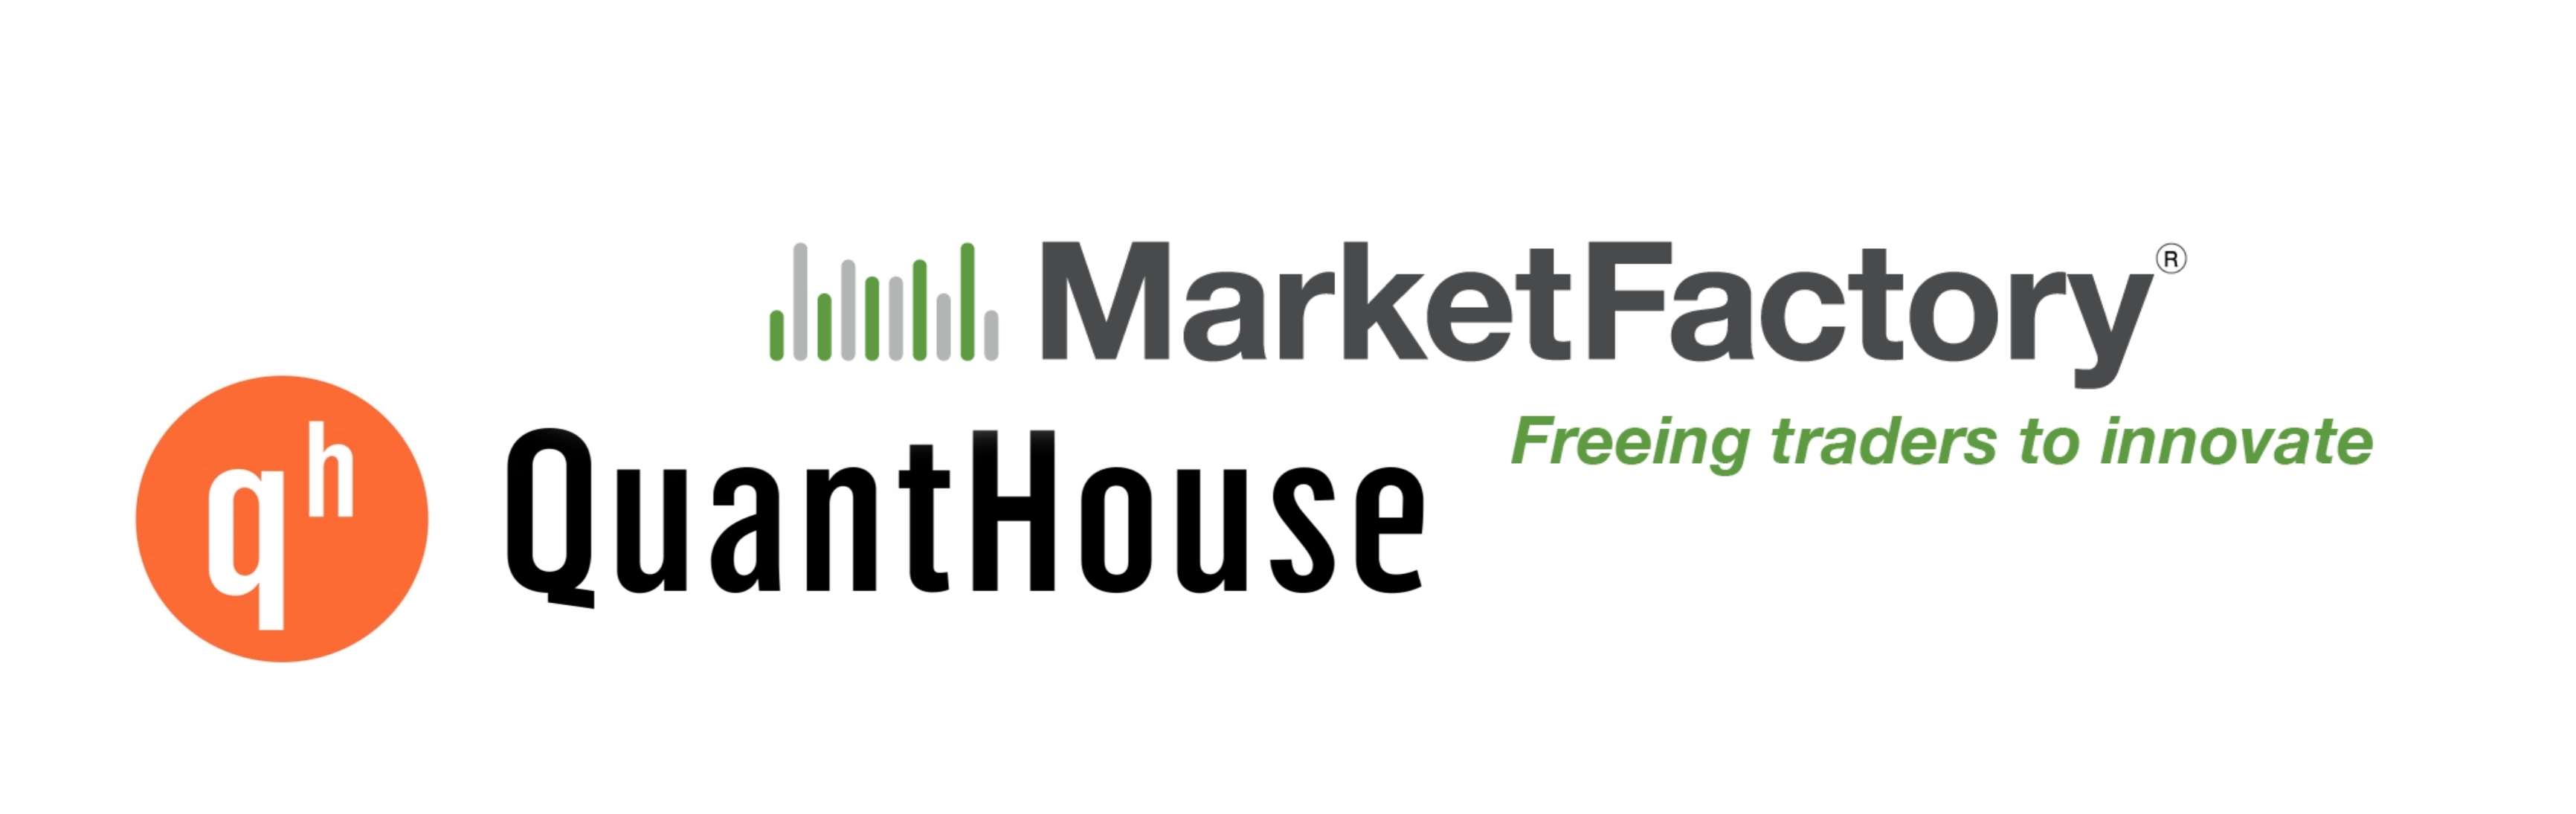 Quanthouse Welcomes MarketFactory FX Platform Onto its qh API Ecosystem Store Delivering Global Access to More Than 90 FX Destinations Through One Single API